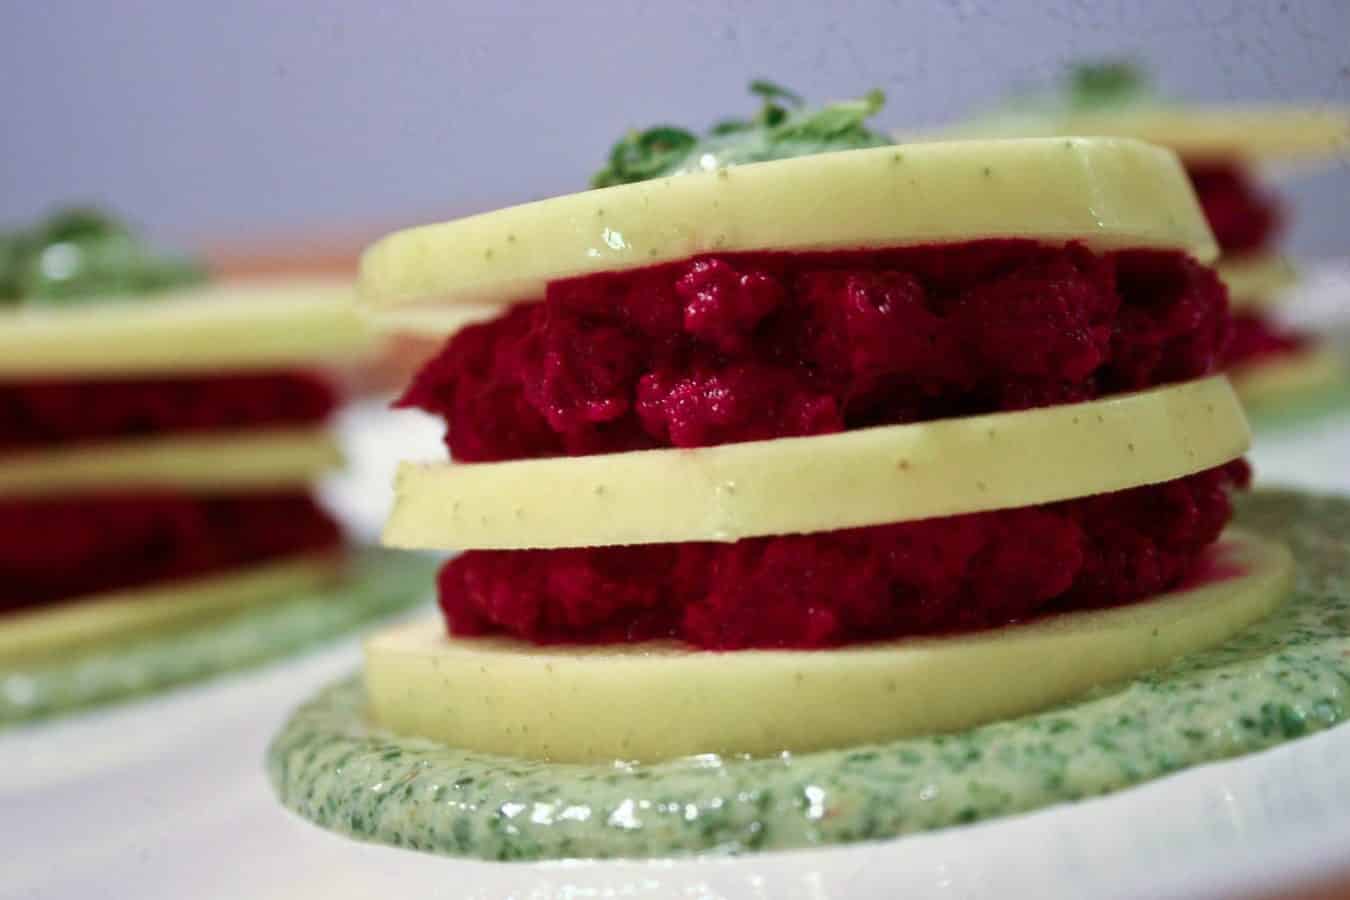 5 Star Makeover: Apples With Beet Hummus and Mint Yogurt Sauce